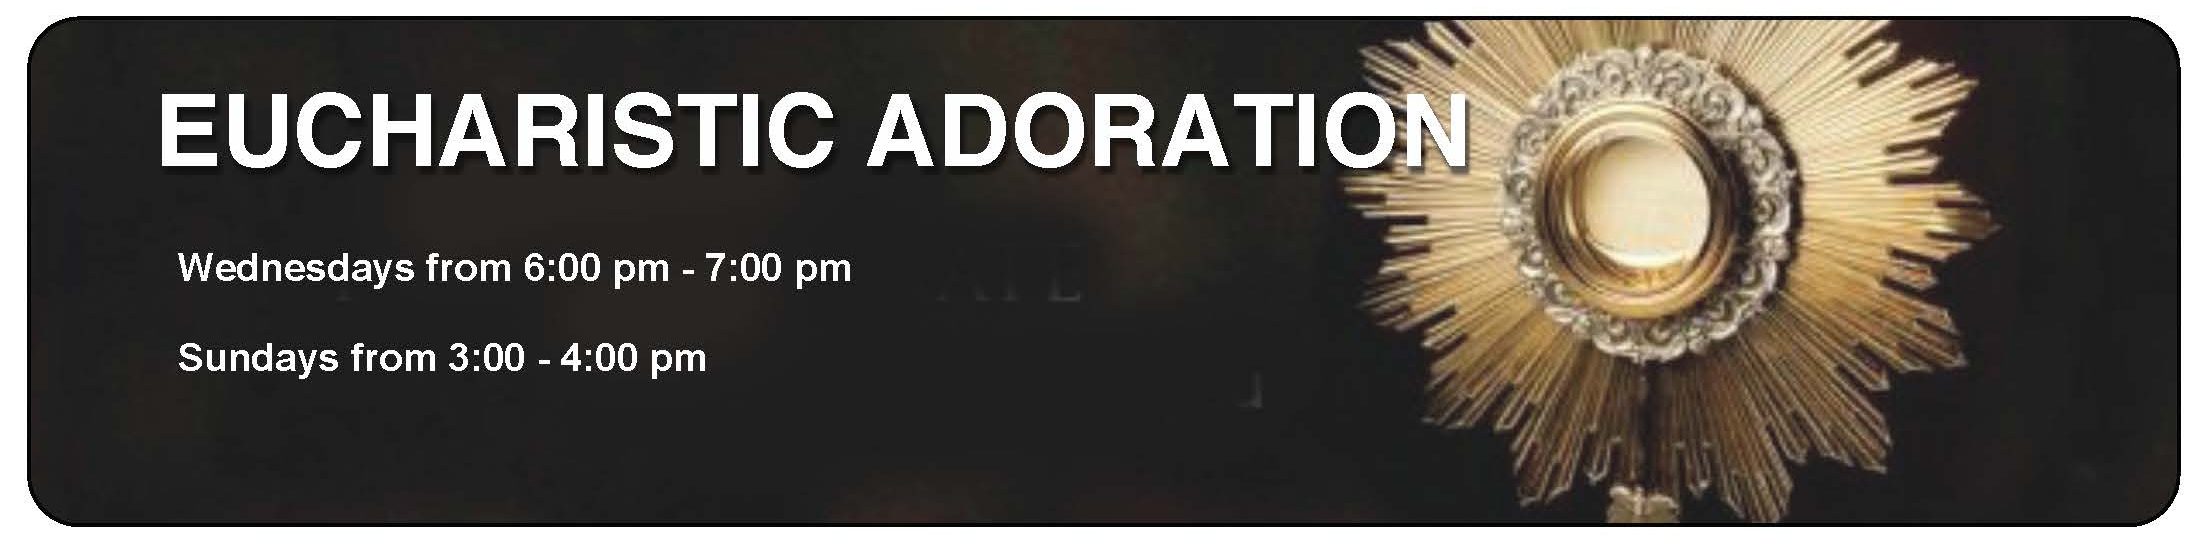 adoration%20banner%20st%20Mary%20copy